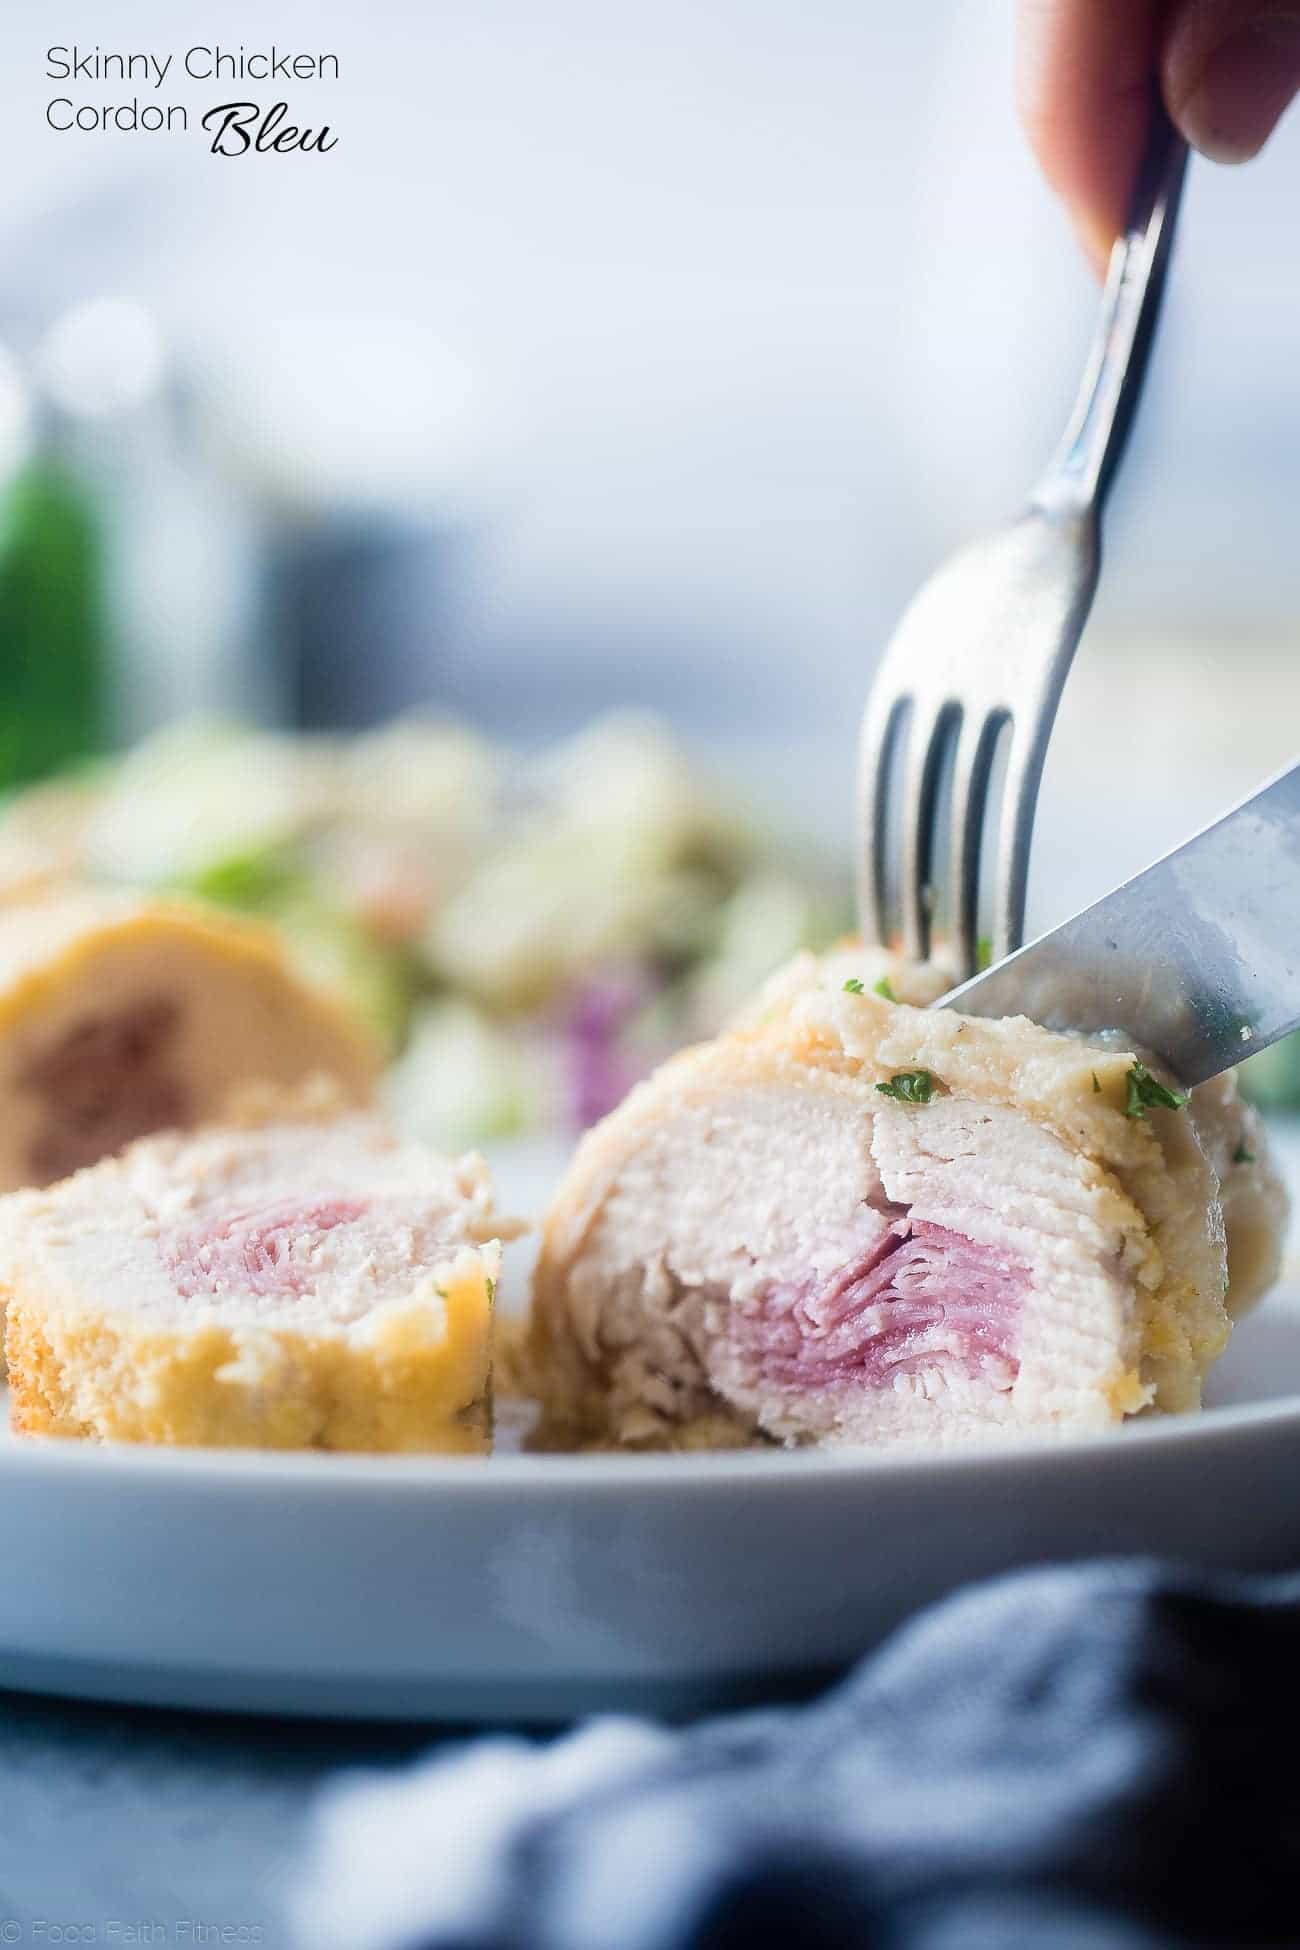 Healthy Baked Chicken Cordon Bleu - This dairy and gluten free chicken cordon bleu has a creamy cauliflower Alfredo sauce instead of cheese! It's an easy, low carb, kid-friendly weeknight meal! | Foodfaithfitness.com | @FoodfaithFit